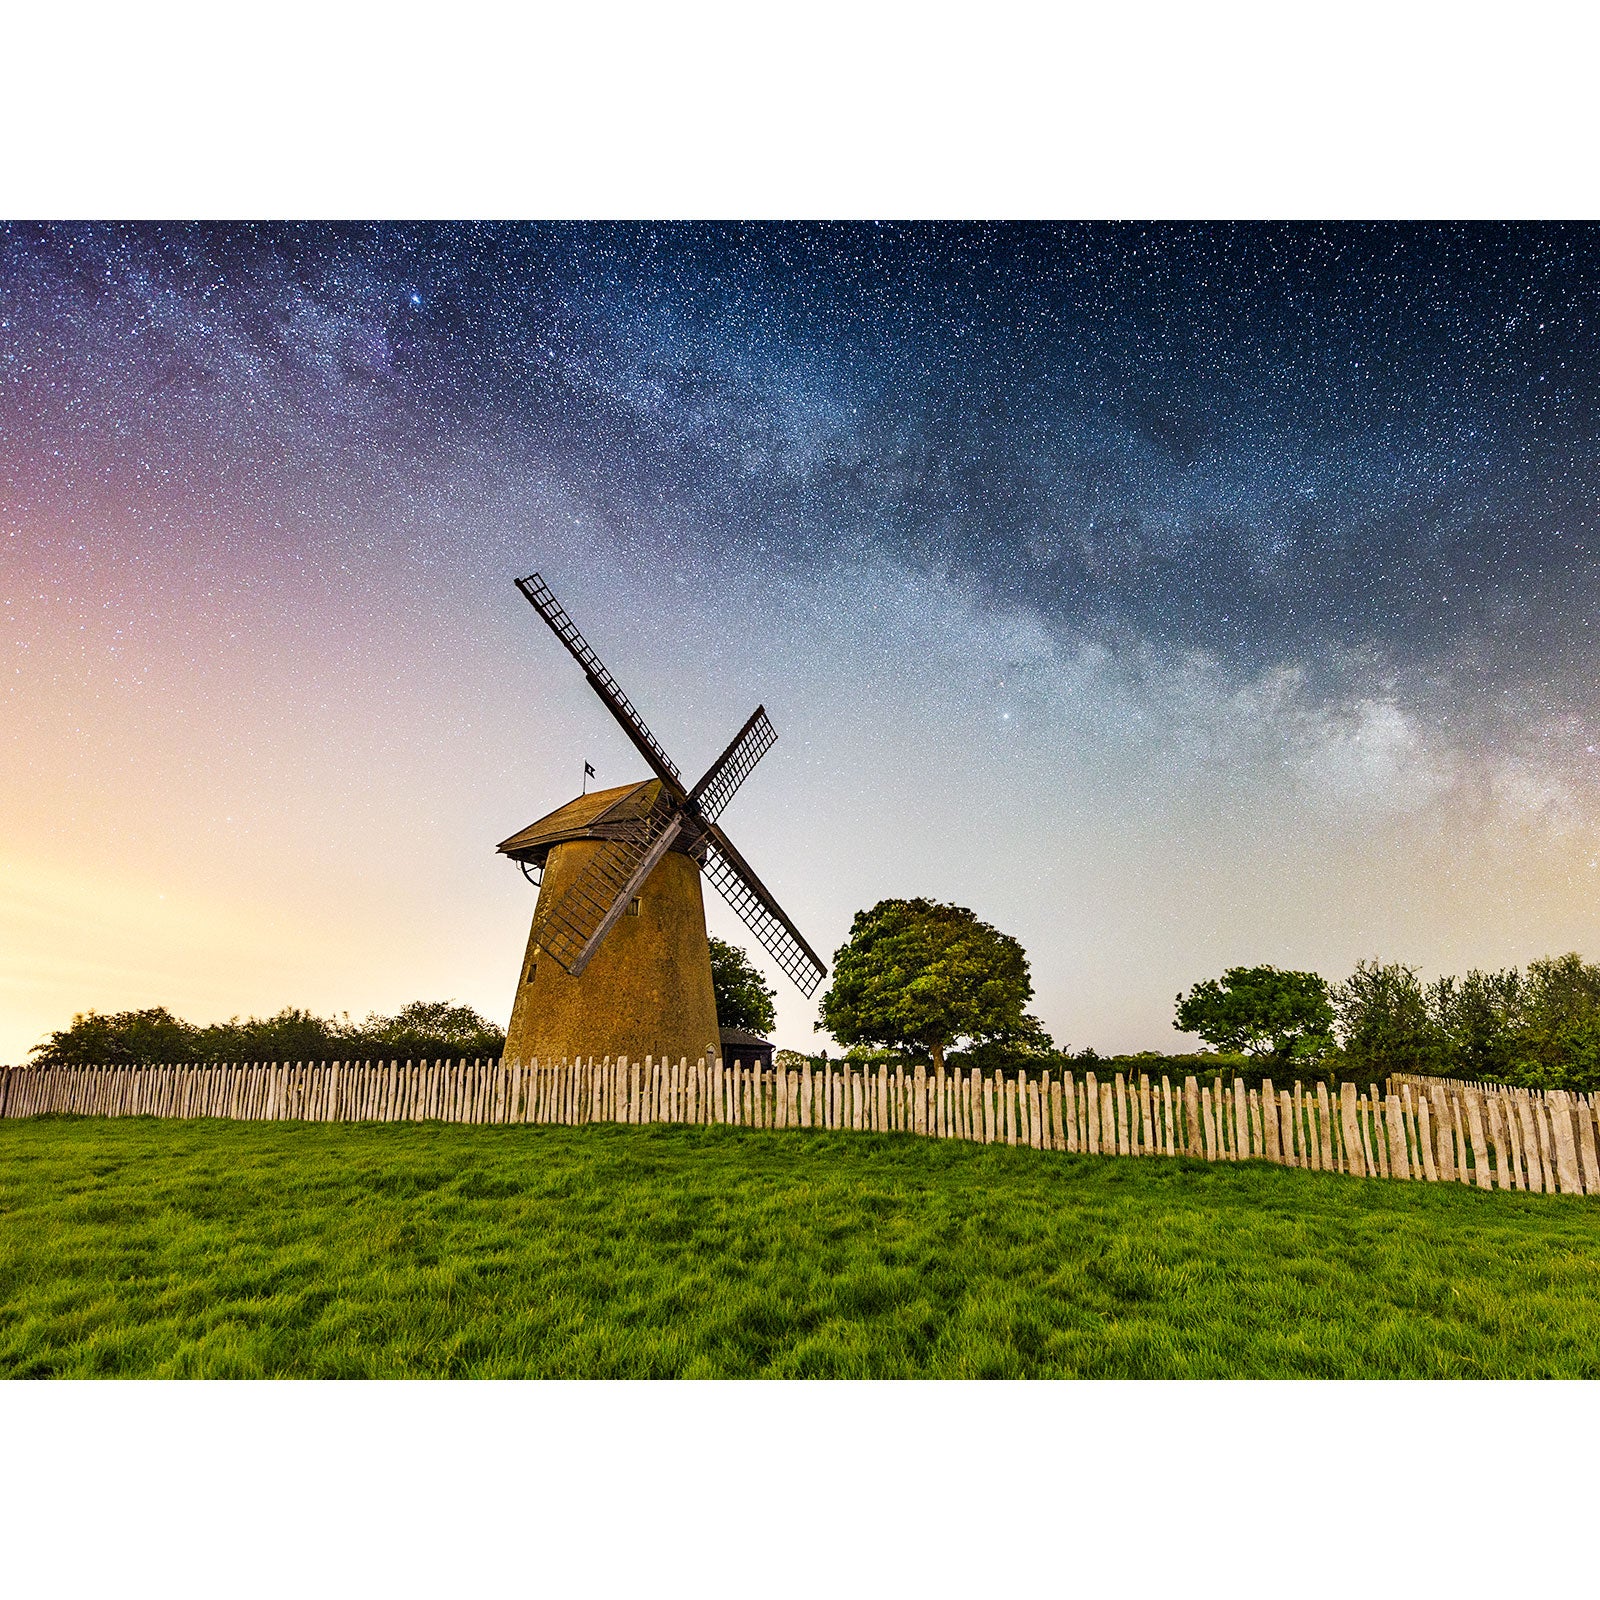 A Milky Way night sky over a Bembridge Windmill surrounded by a wooden fence on the Isle of Wight captured by Available Light Photography.